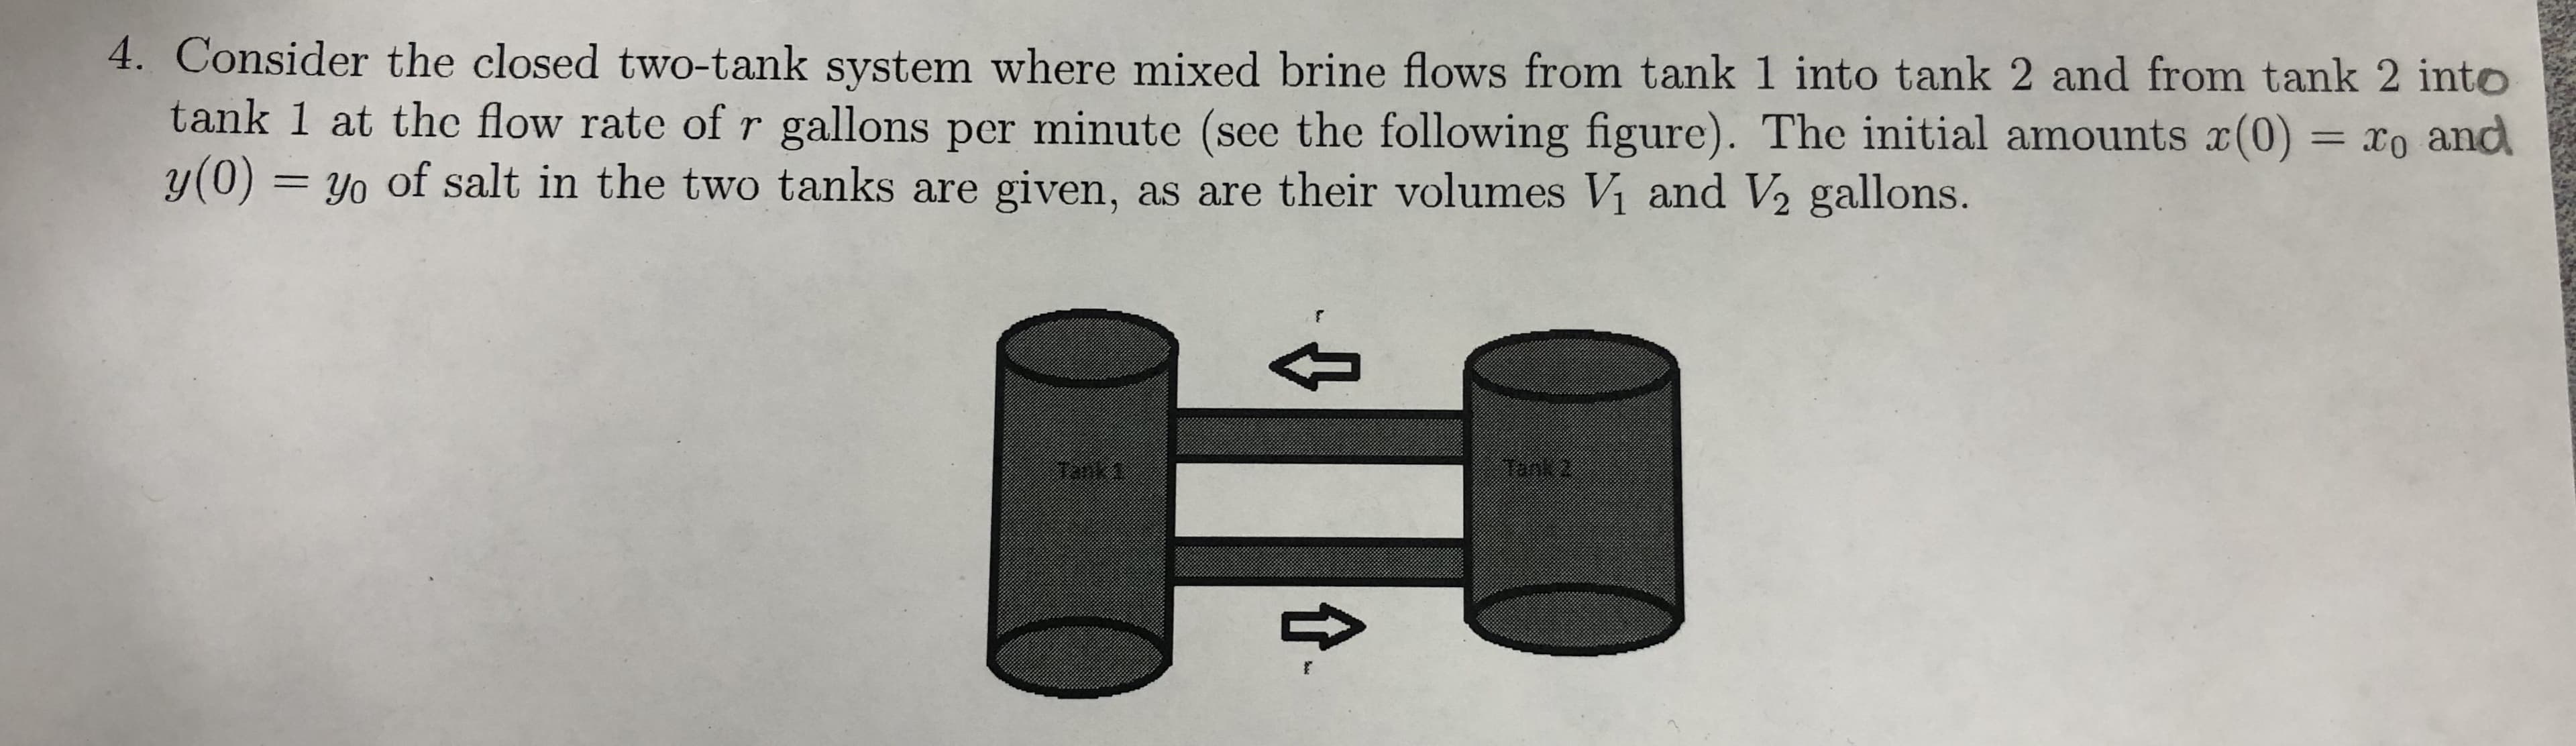 4. Consider the closed two-tank system where mixed brine flows from tank 1 into tank 2 and from tank 2 into
tank 1 at the flow rate of r gallons per minute (see the following figure). The initial amounts x(0) = To and
y(0)= yo of salt in the two tanks are given, as are their volumes Vi and V2 gallons.
t
